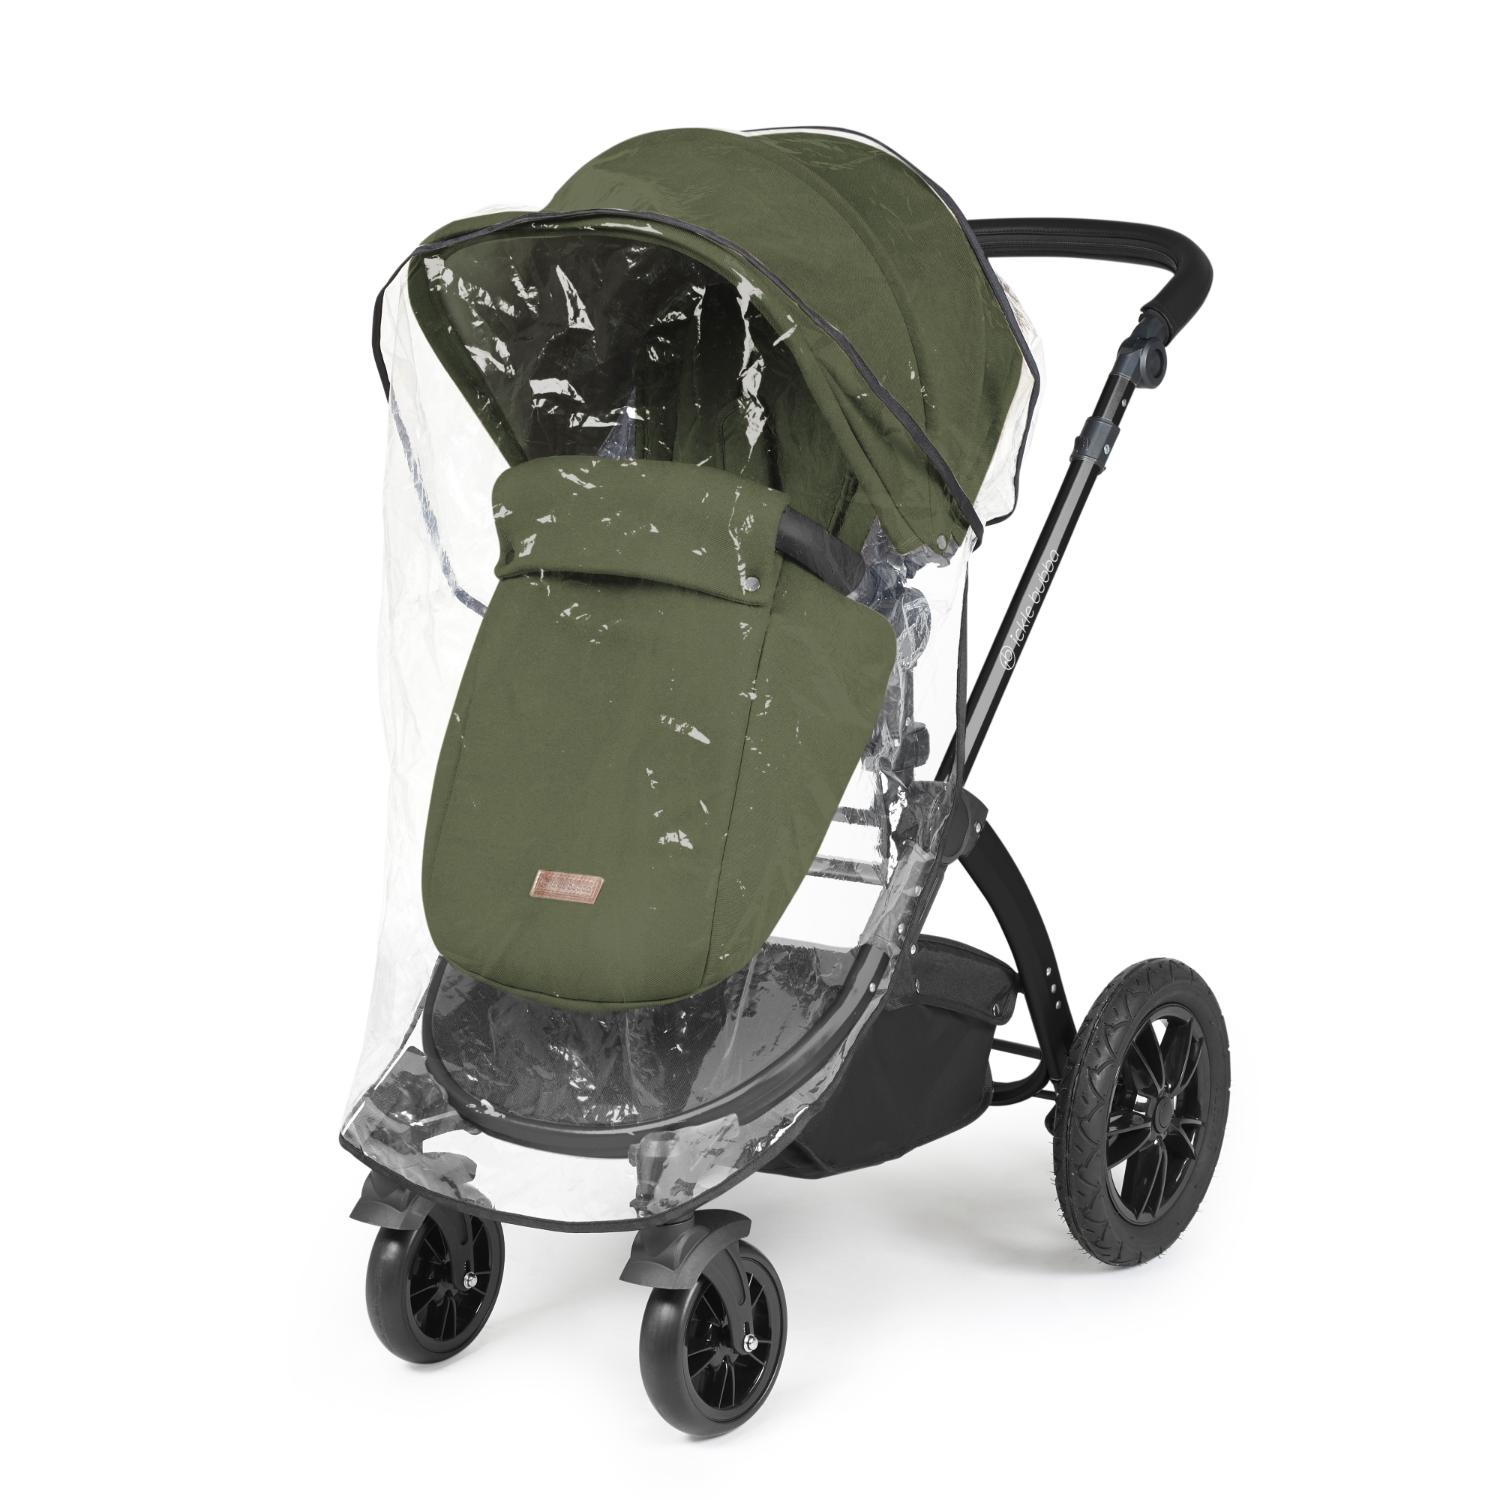 Rain cover placed on an Ickle Bubba Stomp Luxe Pushchair in Woodland green colour